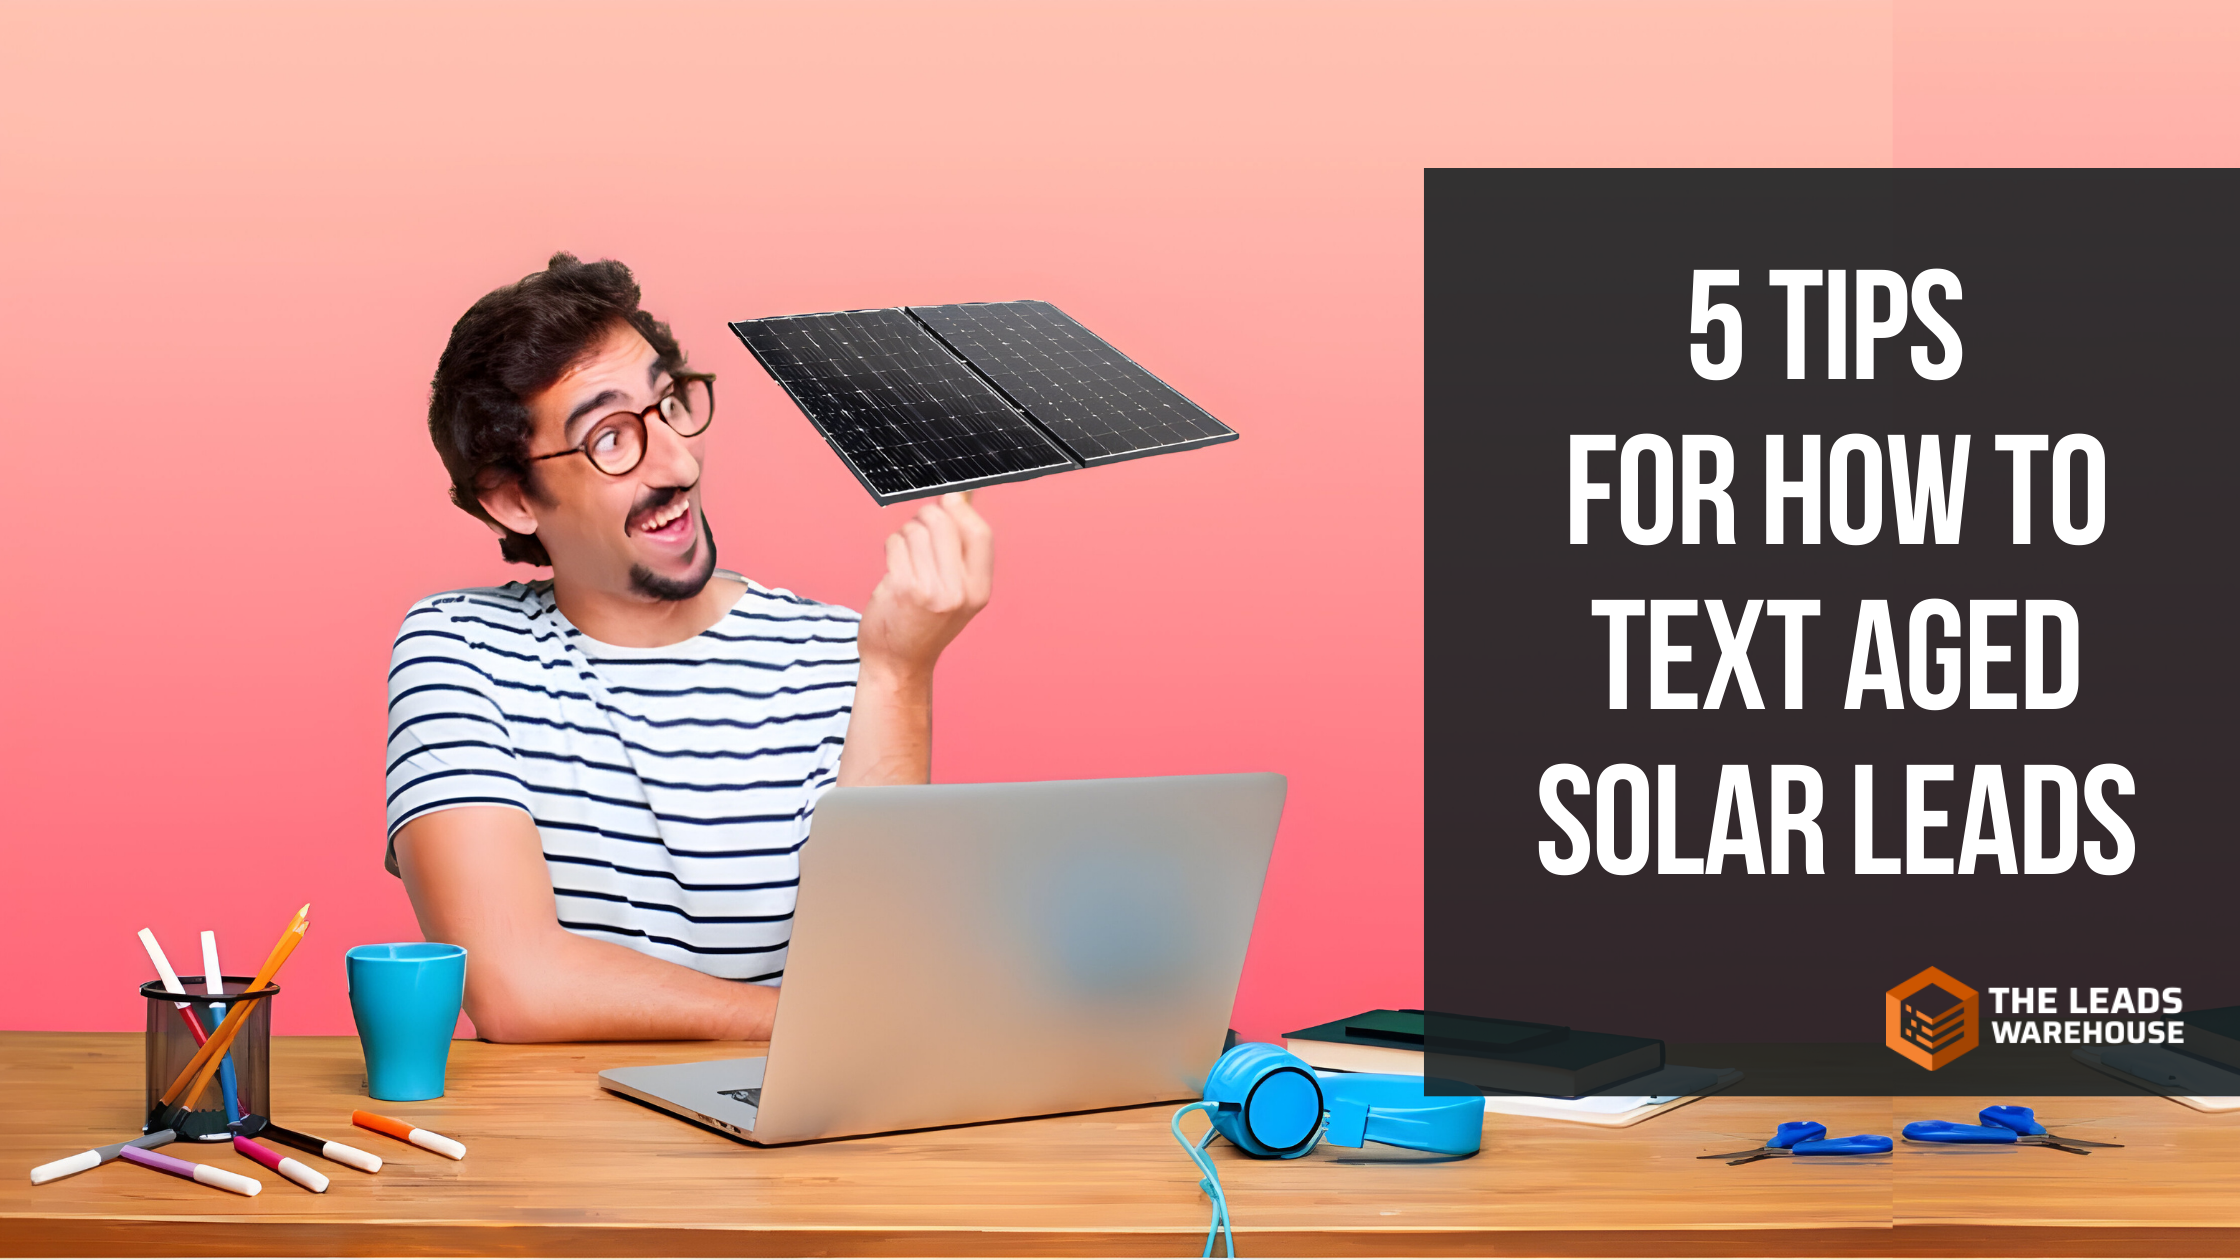 Text Aged Solar Leads | 5 Tips